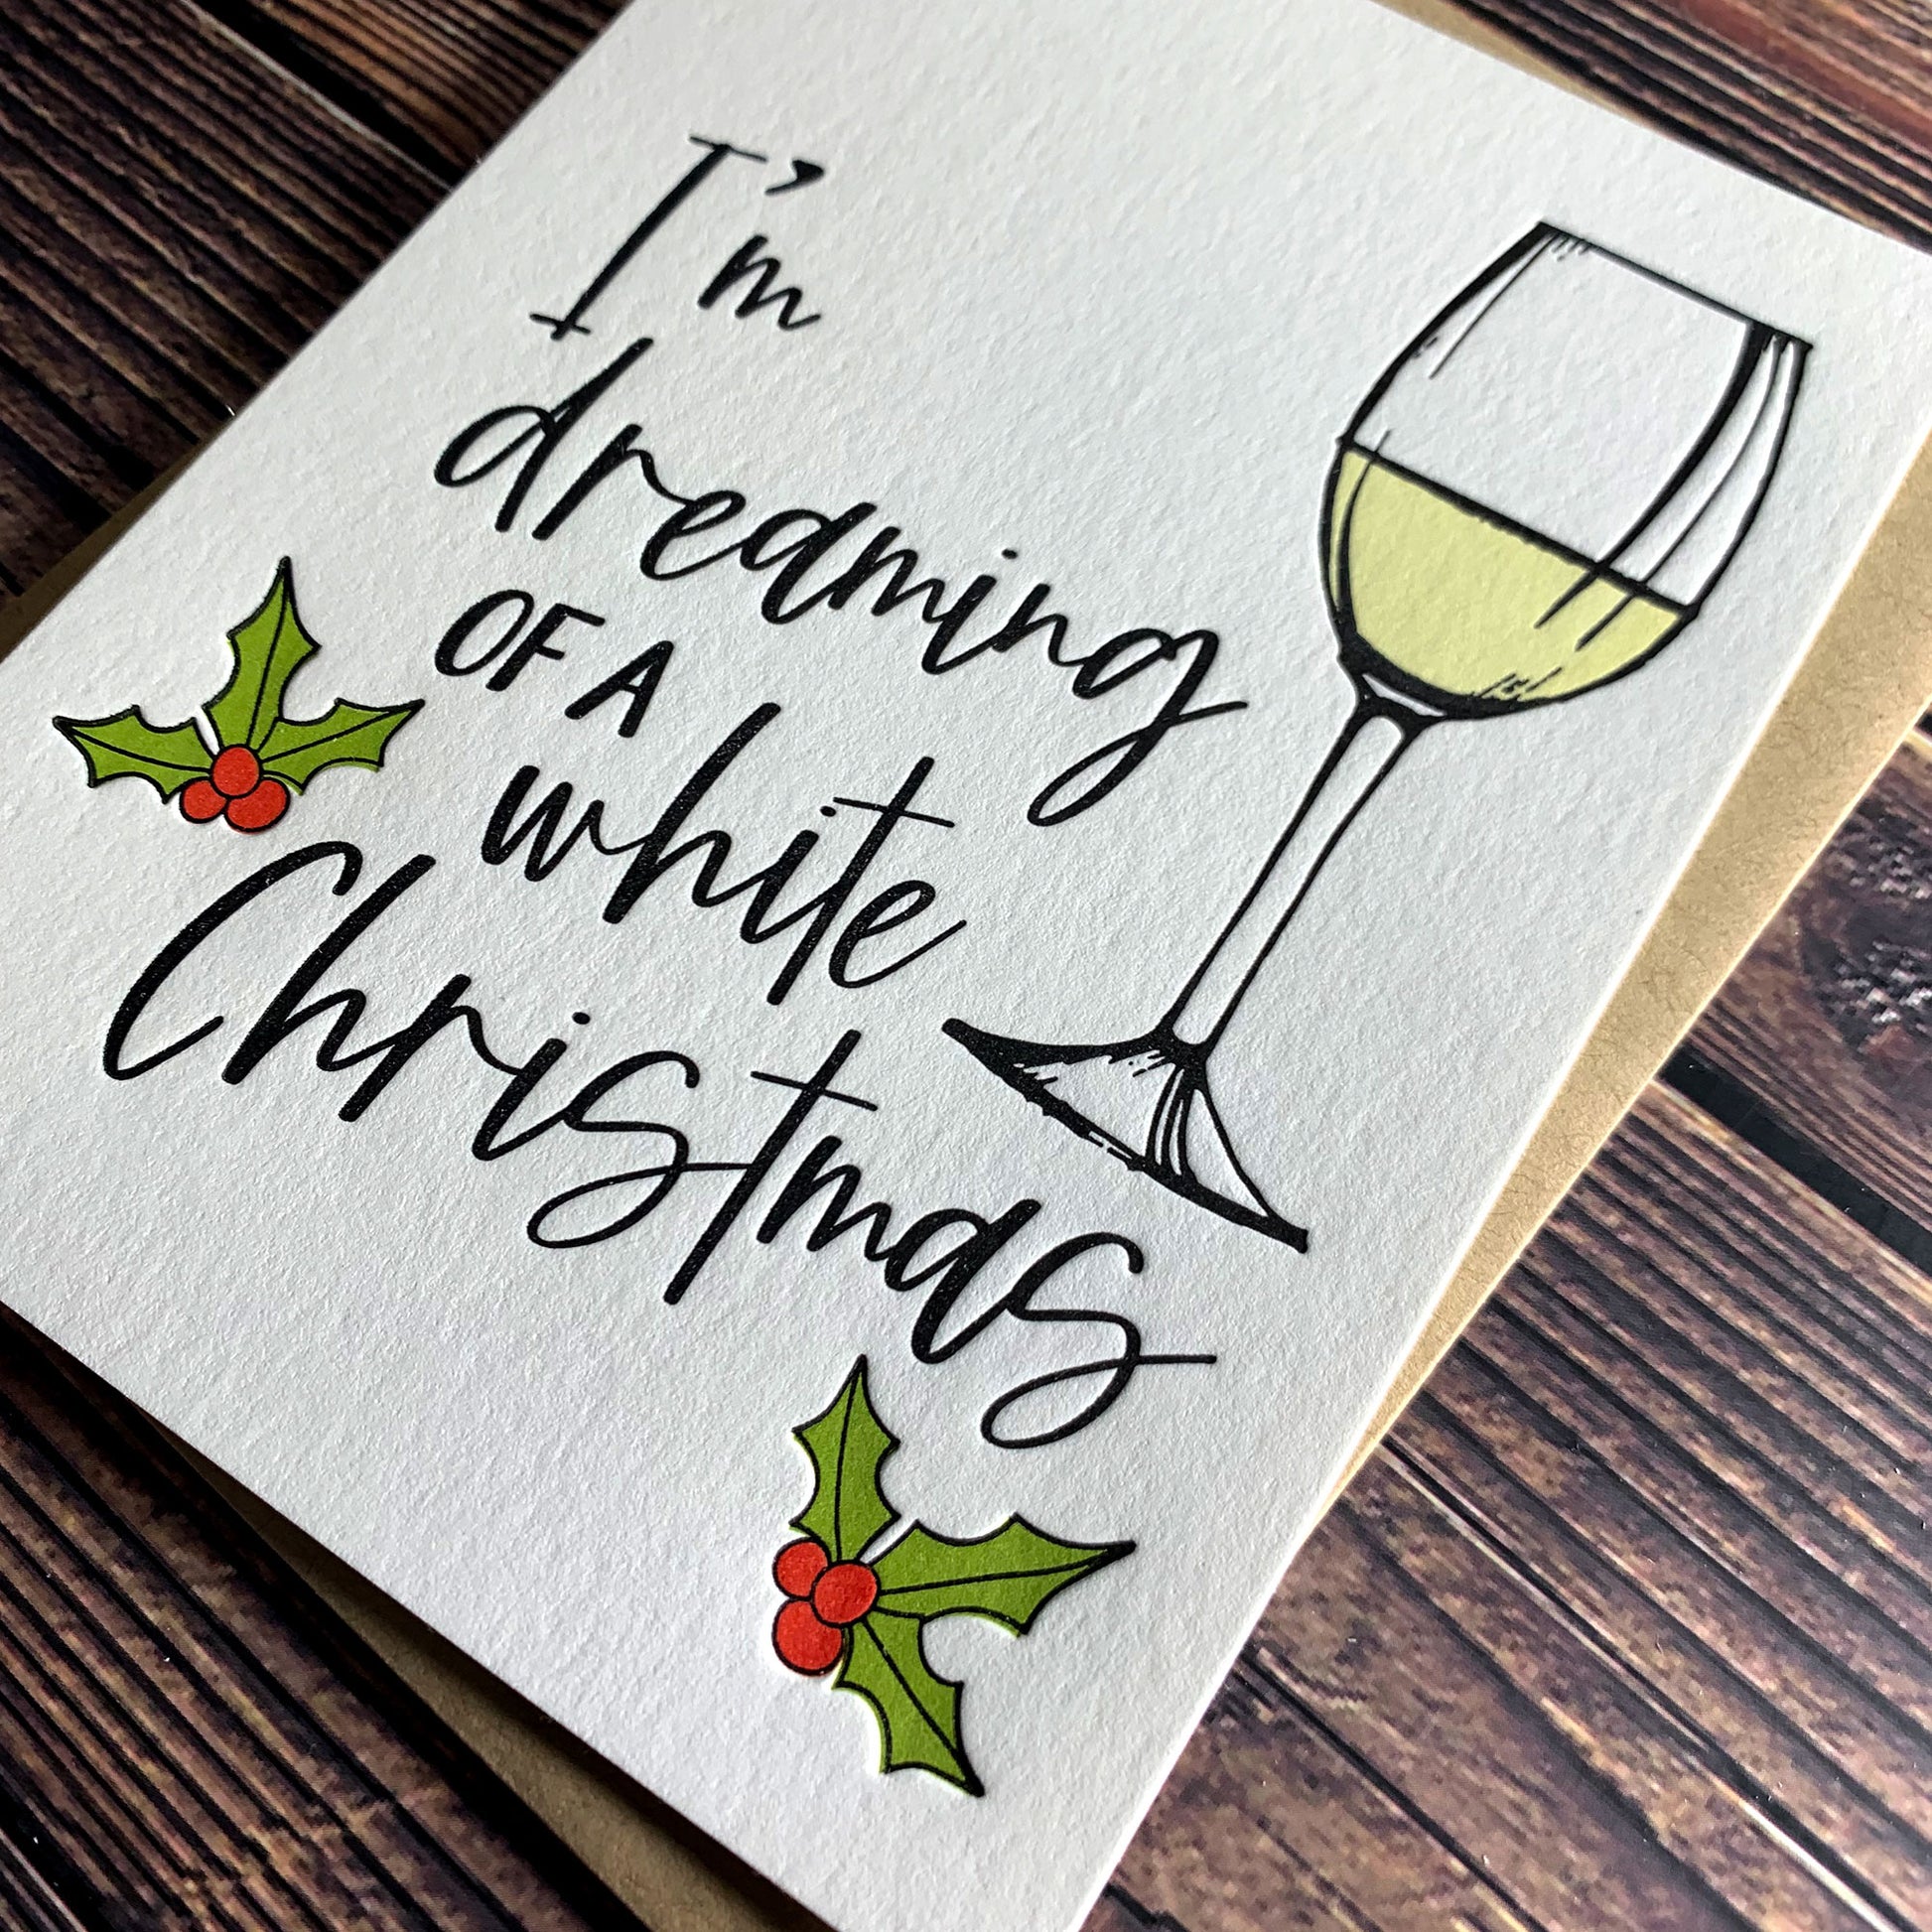 I'm dreaming of a white Christmas, White wine card, Holiday card with wine and holly leaves, Letterpress printed, view shows letterpress impression,  includes envelope